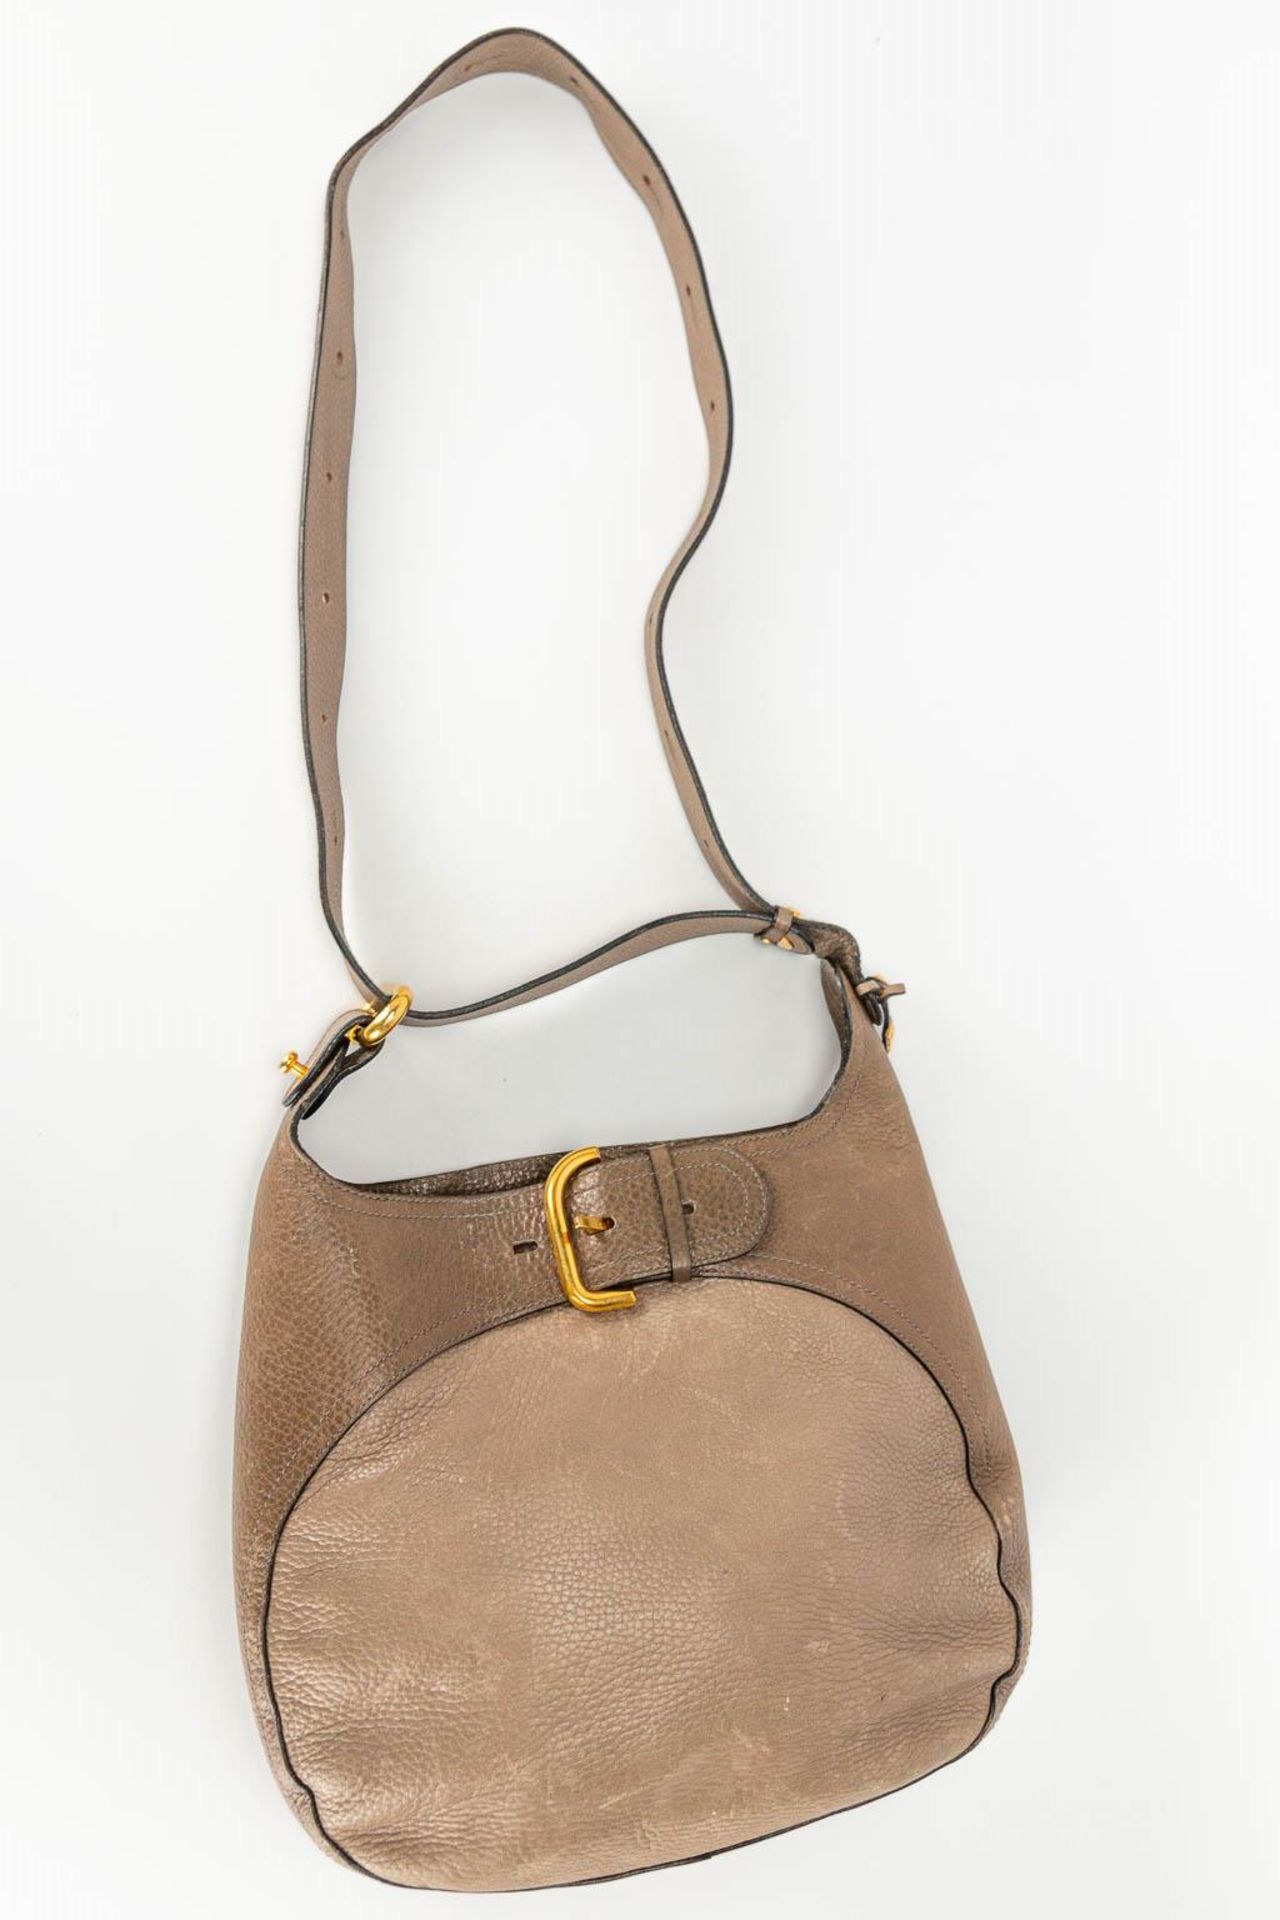 A purse made of brown leather and marked Delvaux. - Image 15 of 16